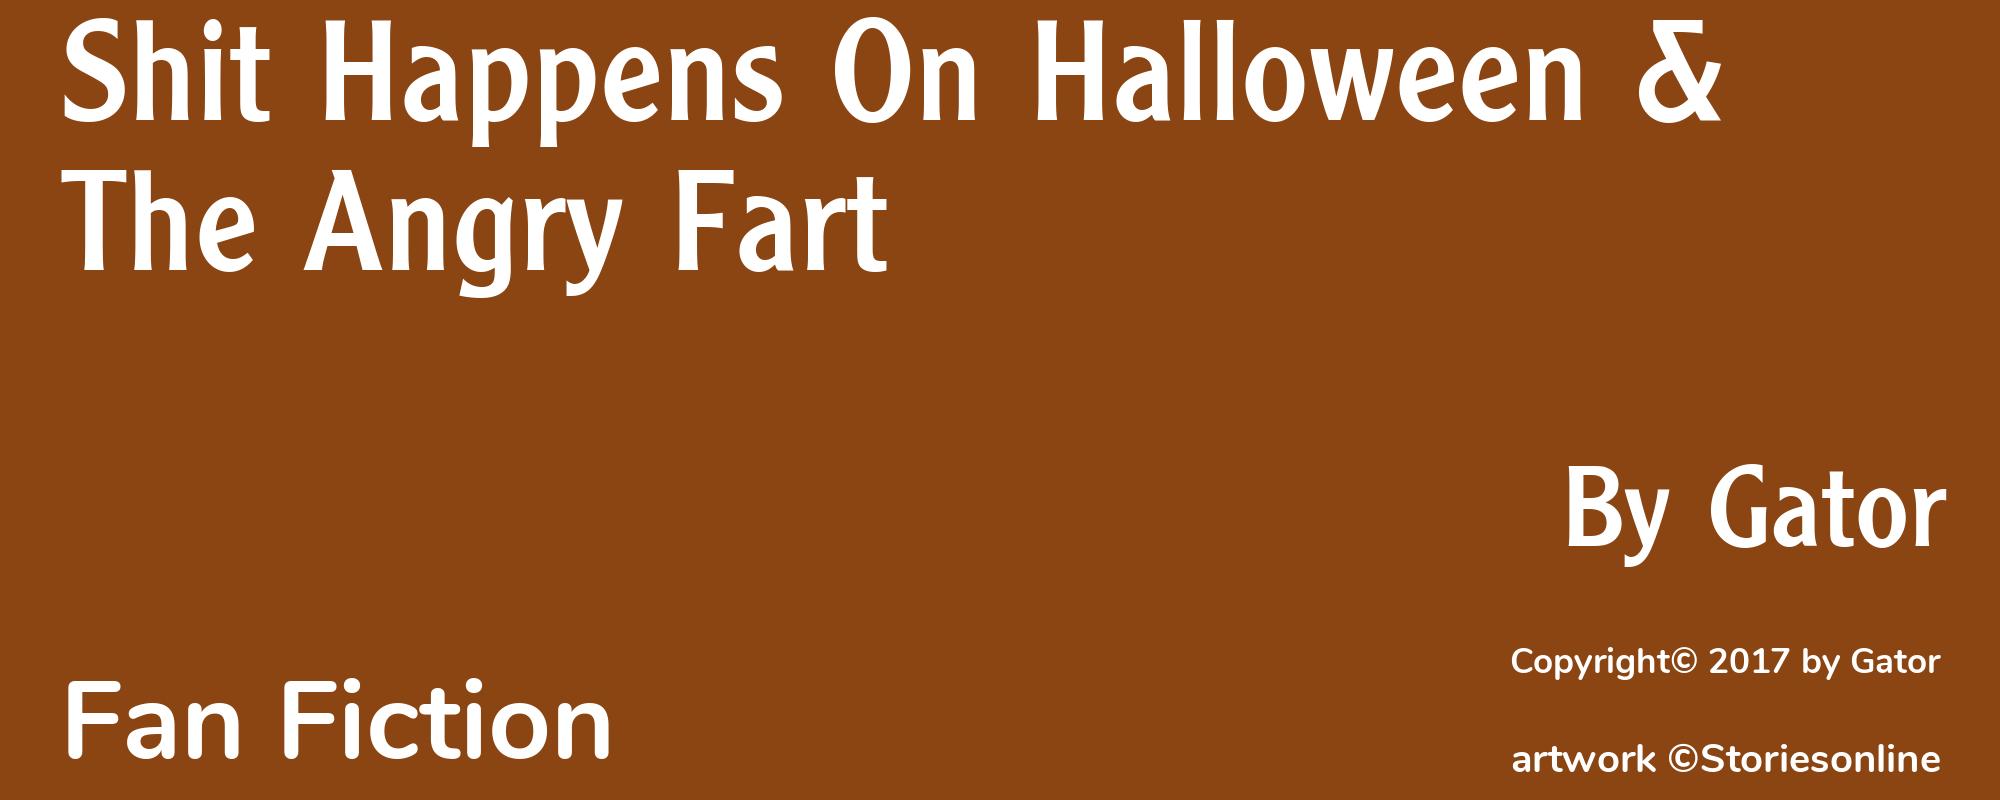 Shit Happens On Halloween & The Angry Fart - Cover